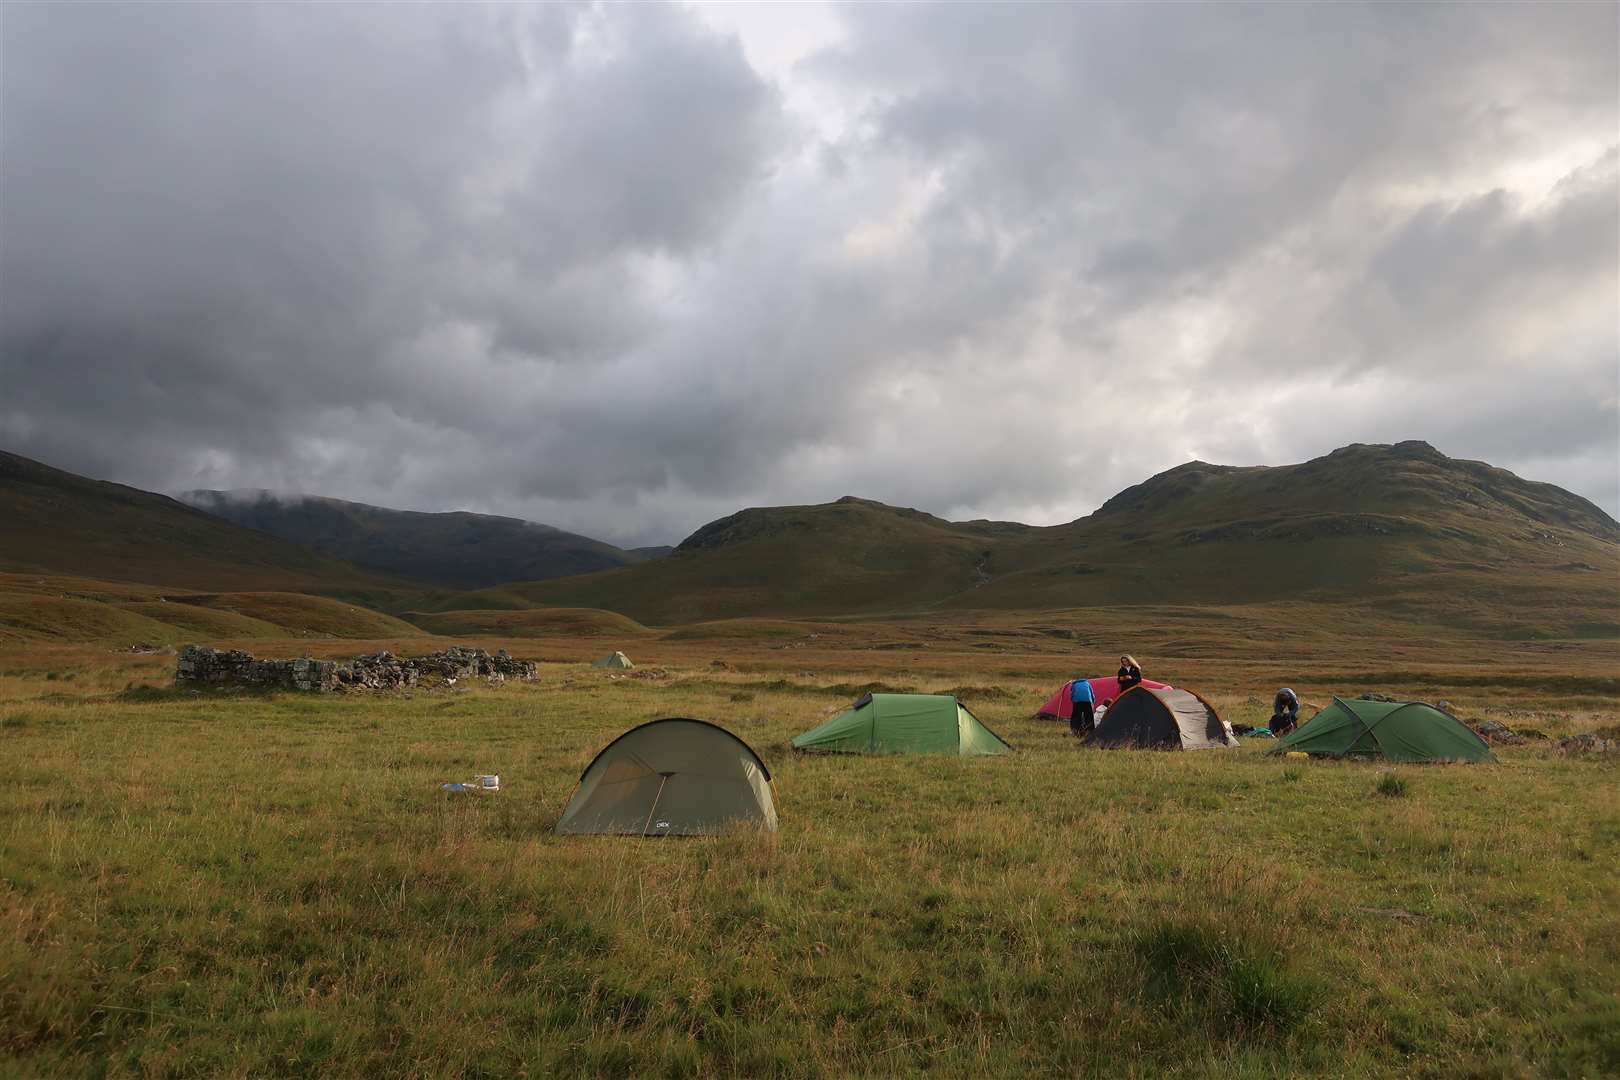 Setting up camp at Lubvan with Meall Cos Charnan close by.